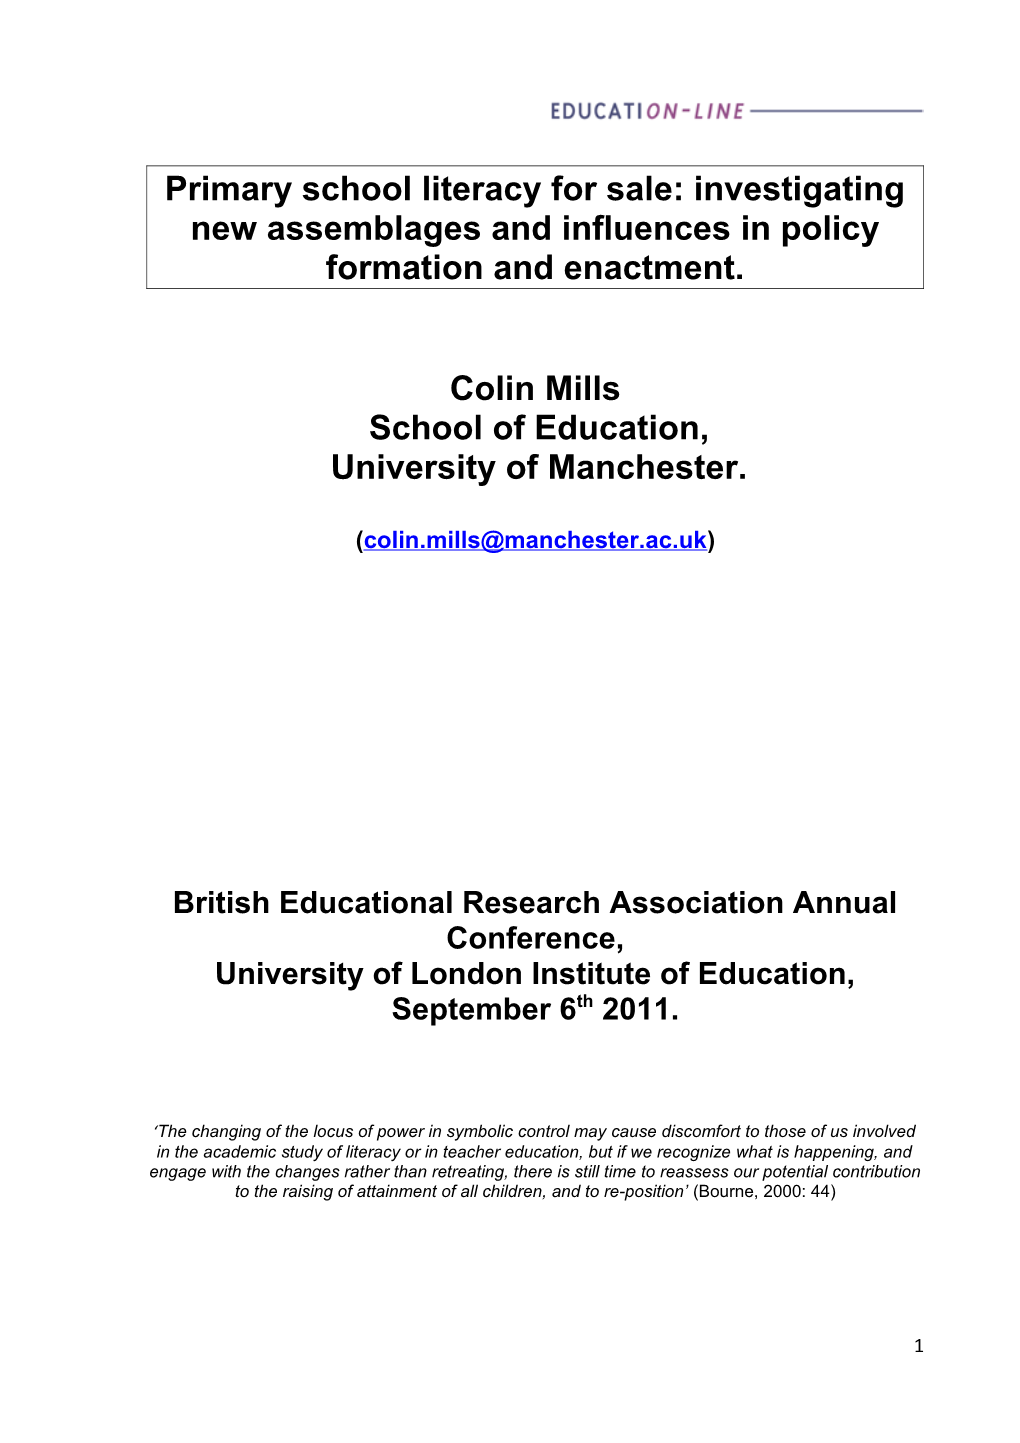 Primary School Literacy for Sale: Investigating New Assemblages and Influences in Policy